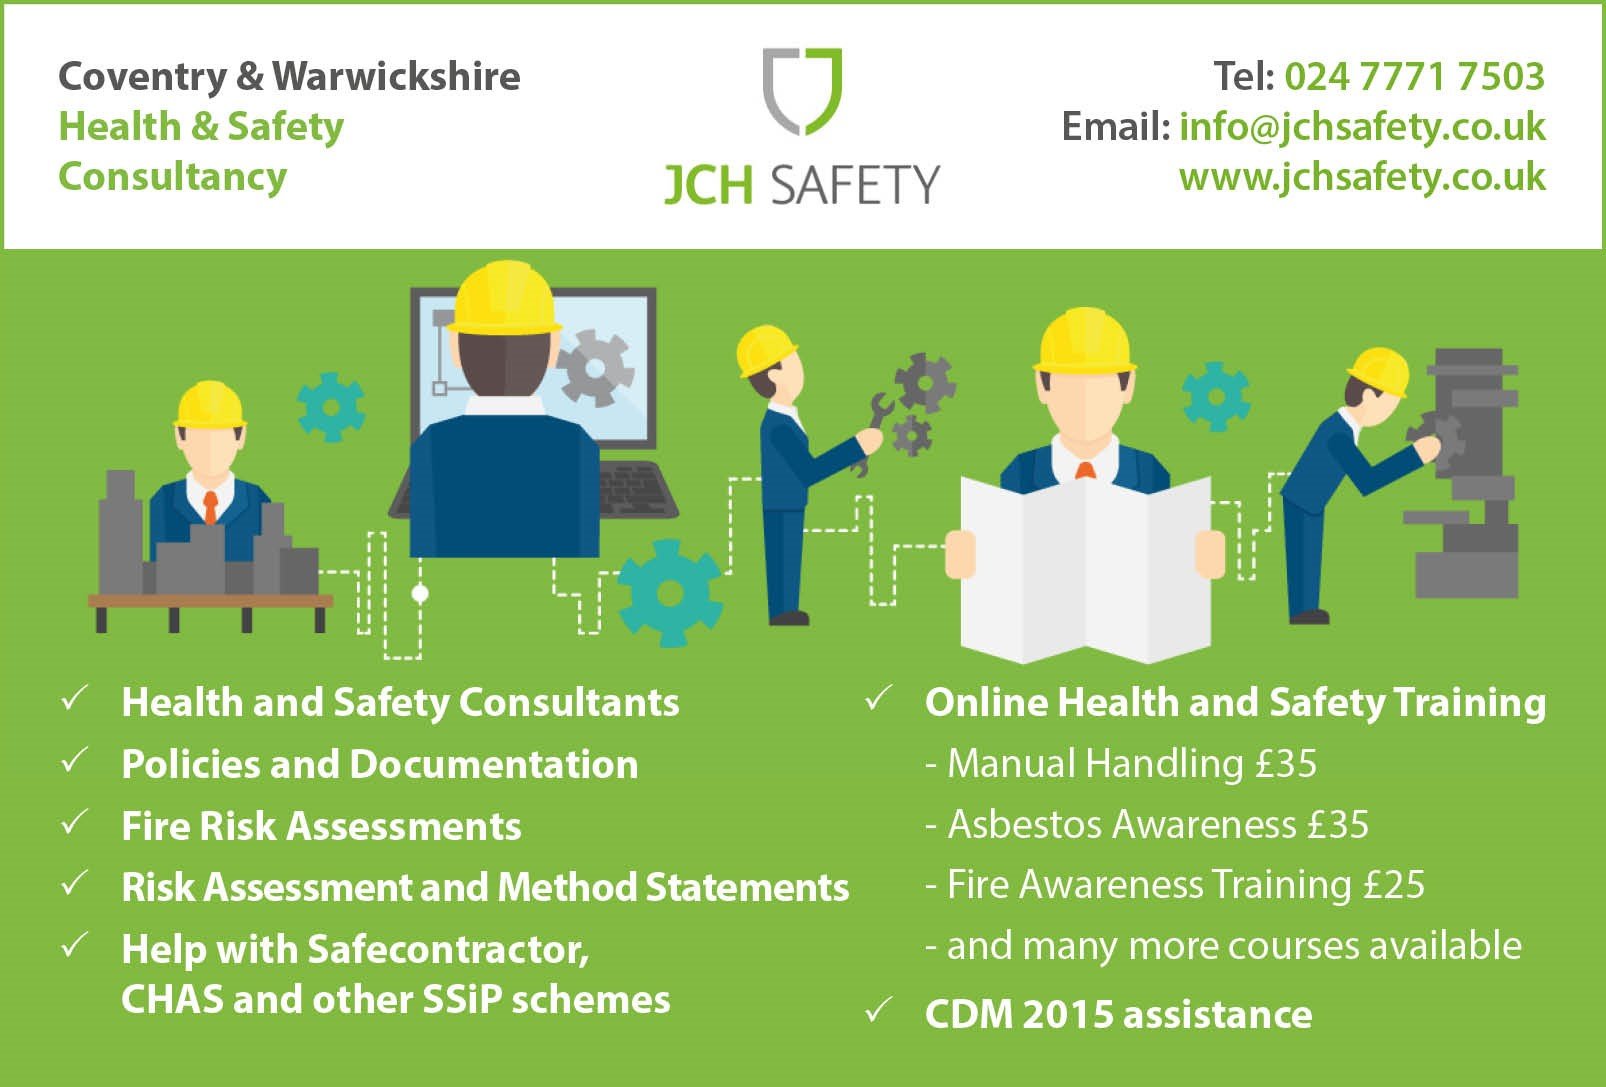 Coventry & Warwickshire Health and Safety Consultancy